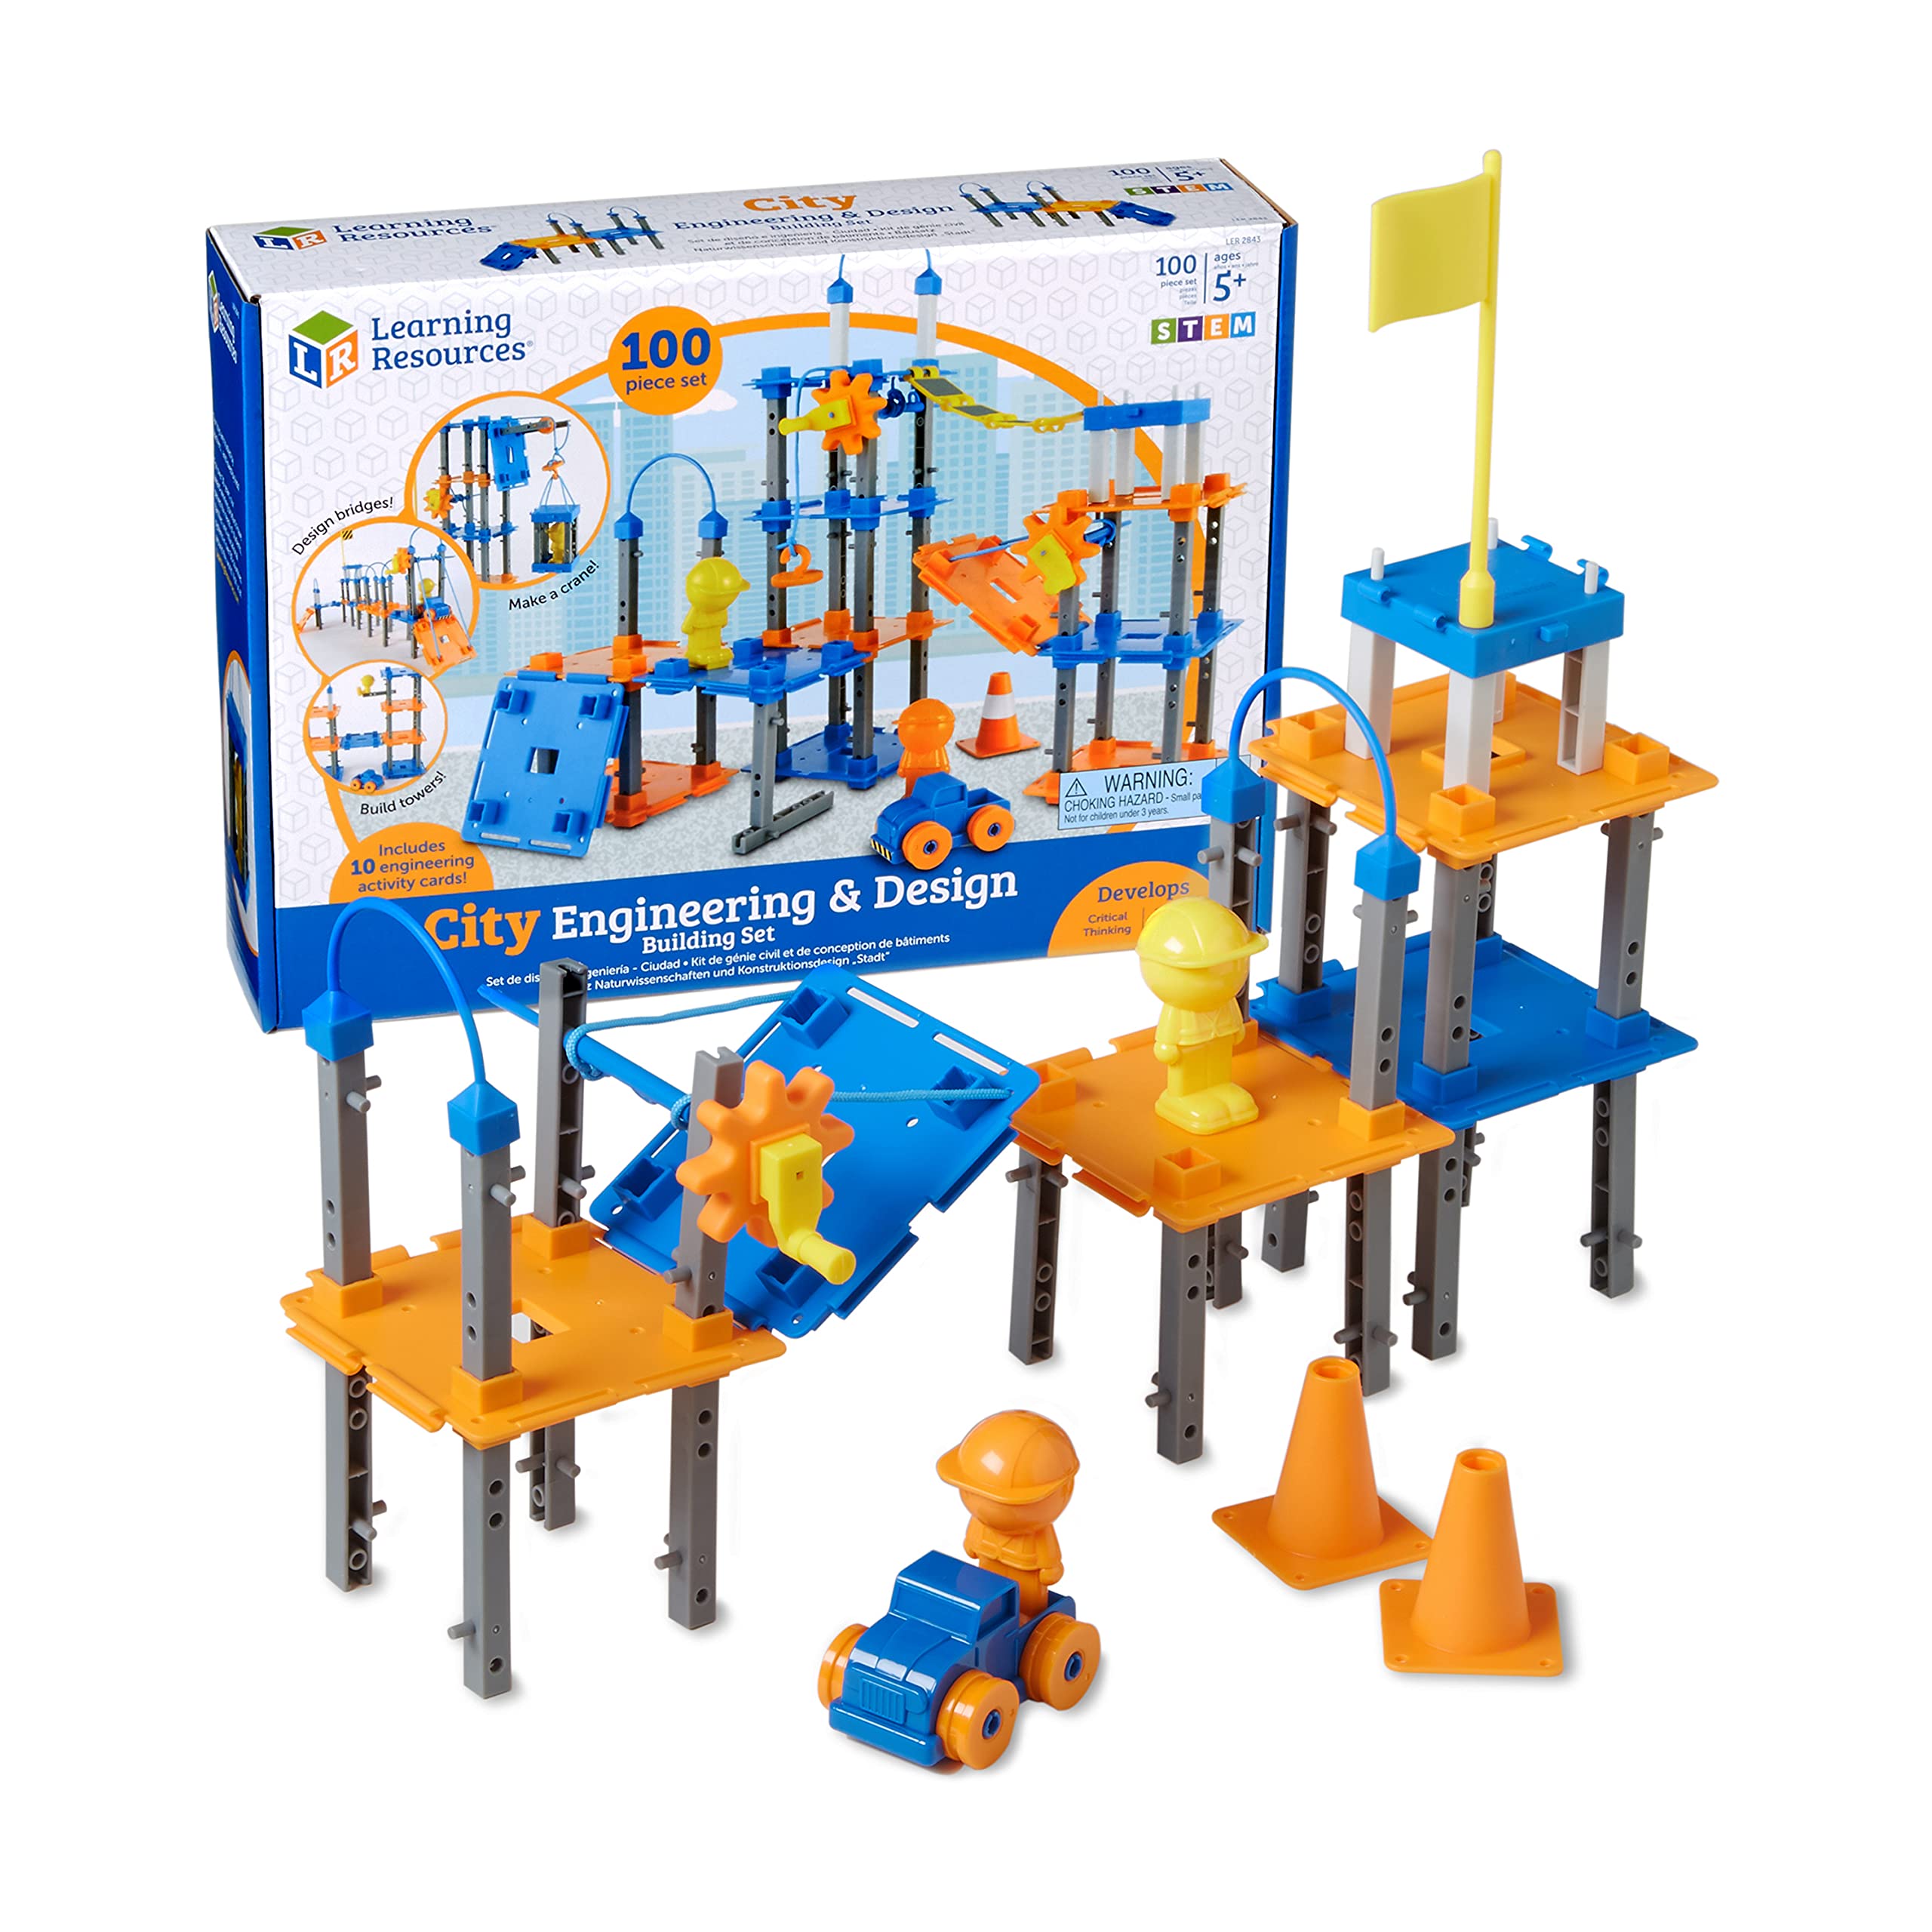 Learning Resources City Engineering and Design Building Set, Ages 5+,100 Pieces, Engineer STEM Toy, Construction Toys, Simple Machines Kids, Back to School Gifts